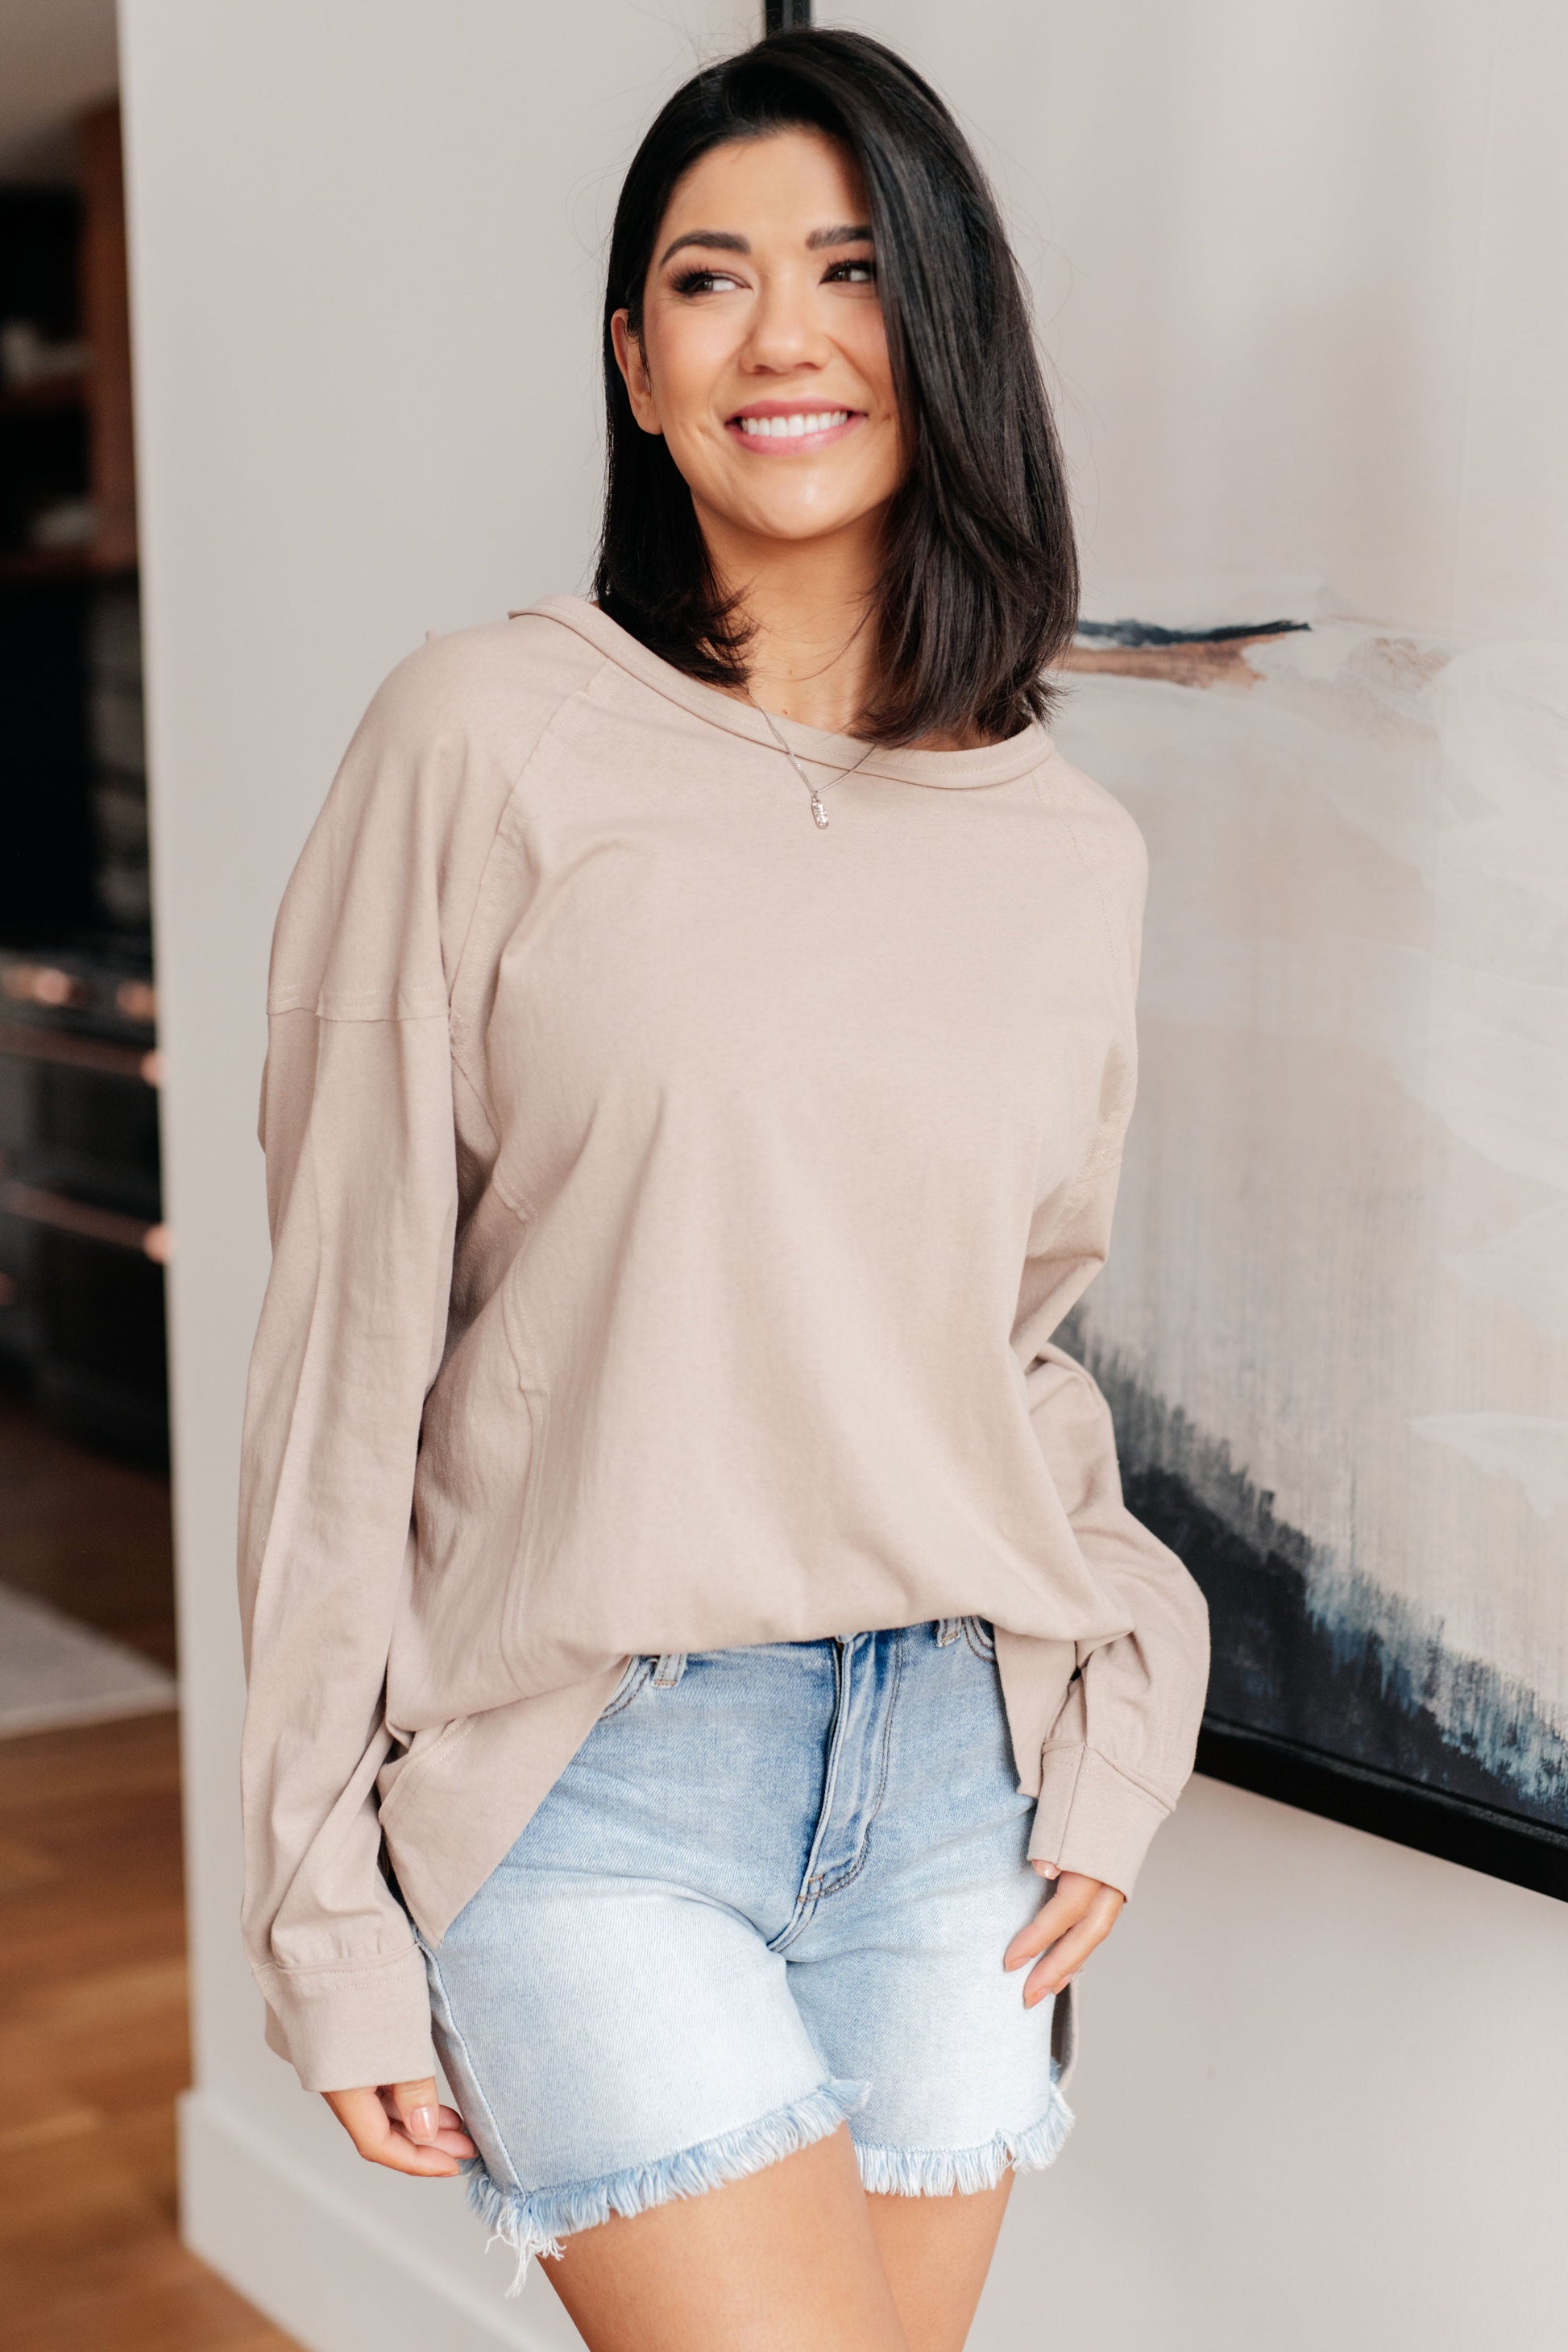 Unwind and feel right in this playful Feels Right Long Sleeve Top. Jersey knit, dropped shoulder to accentuate relaxation. Banded cuff, side slits, and stepped hem for a unique touch. Exposed seams for a hint of edge and an effortlessly chic boat neckline. S - 3X